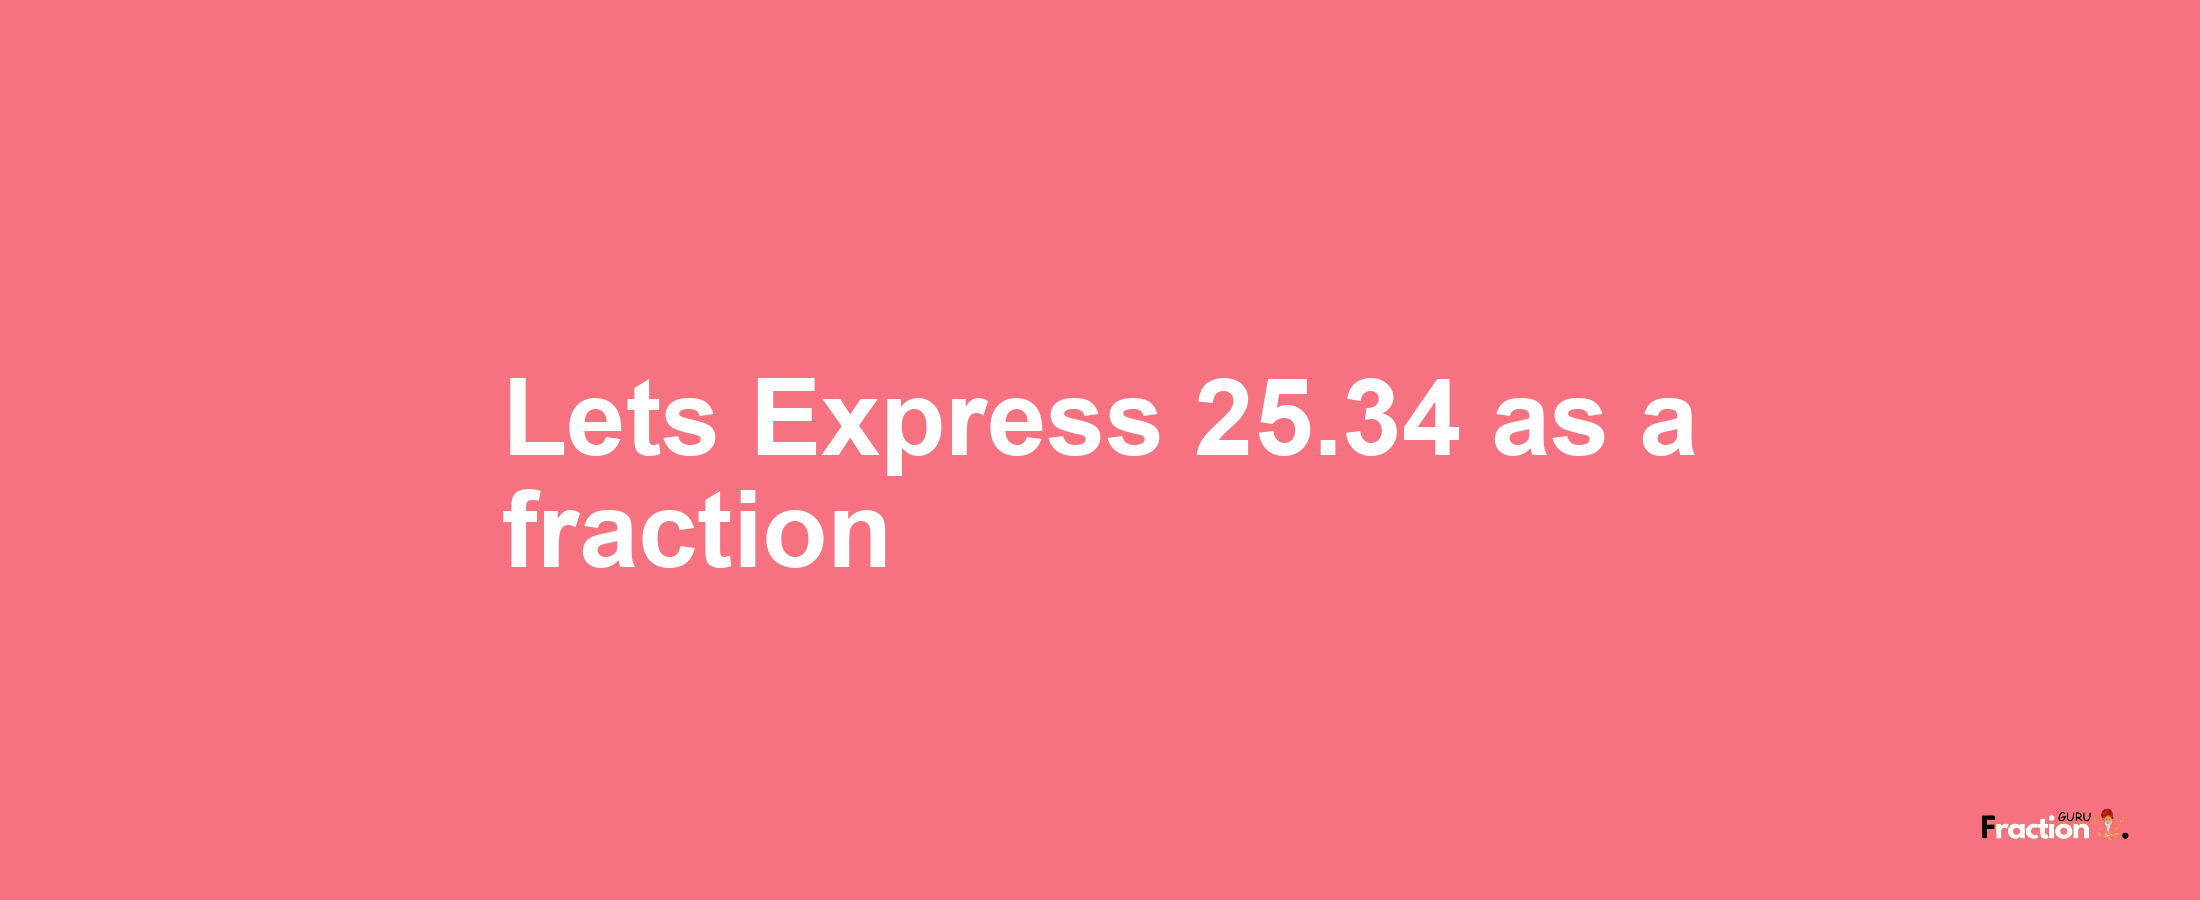 Lets Express 25.34 as afraction